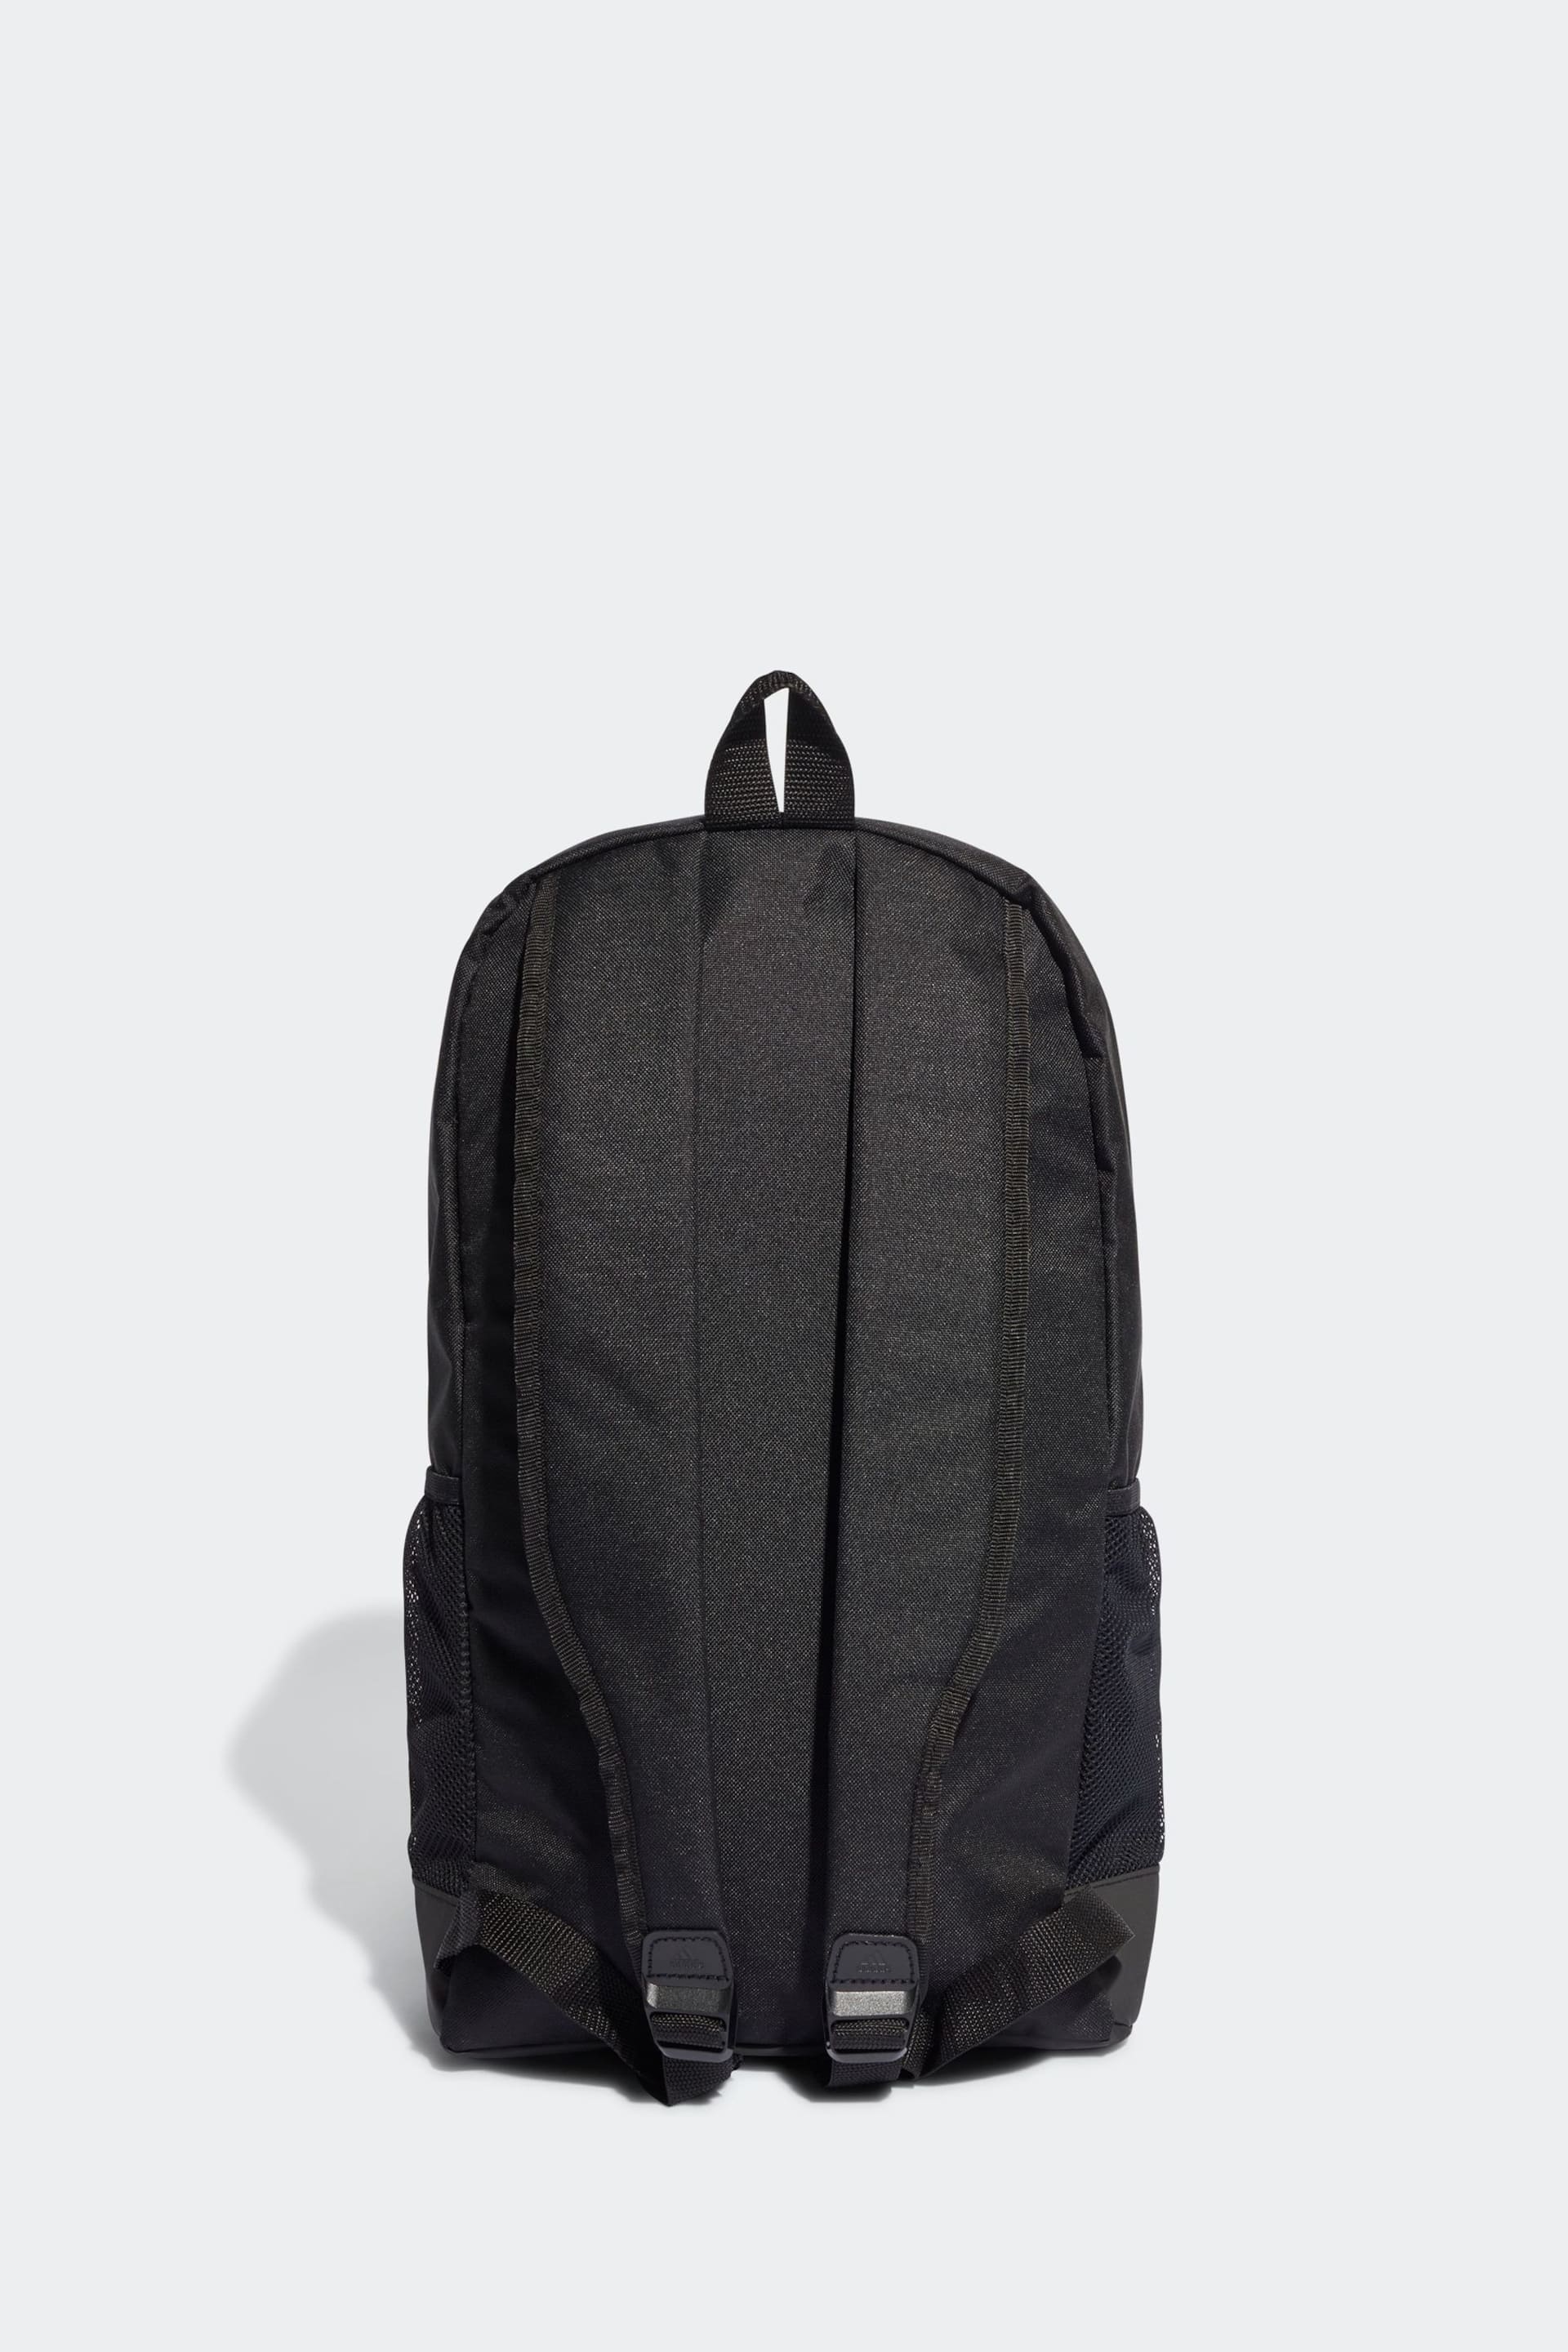 adidas Black Linear Backpack - Image 2 of 5